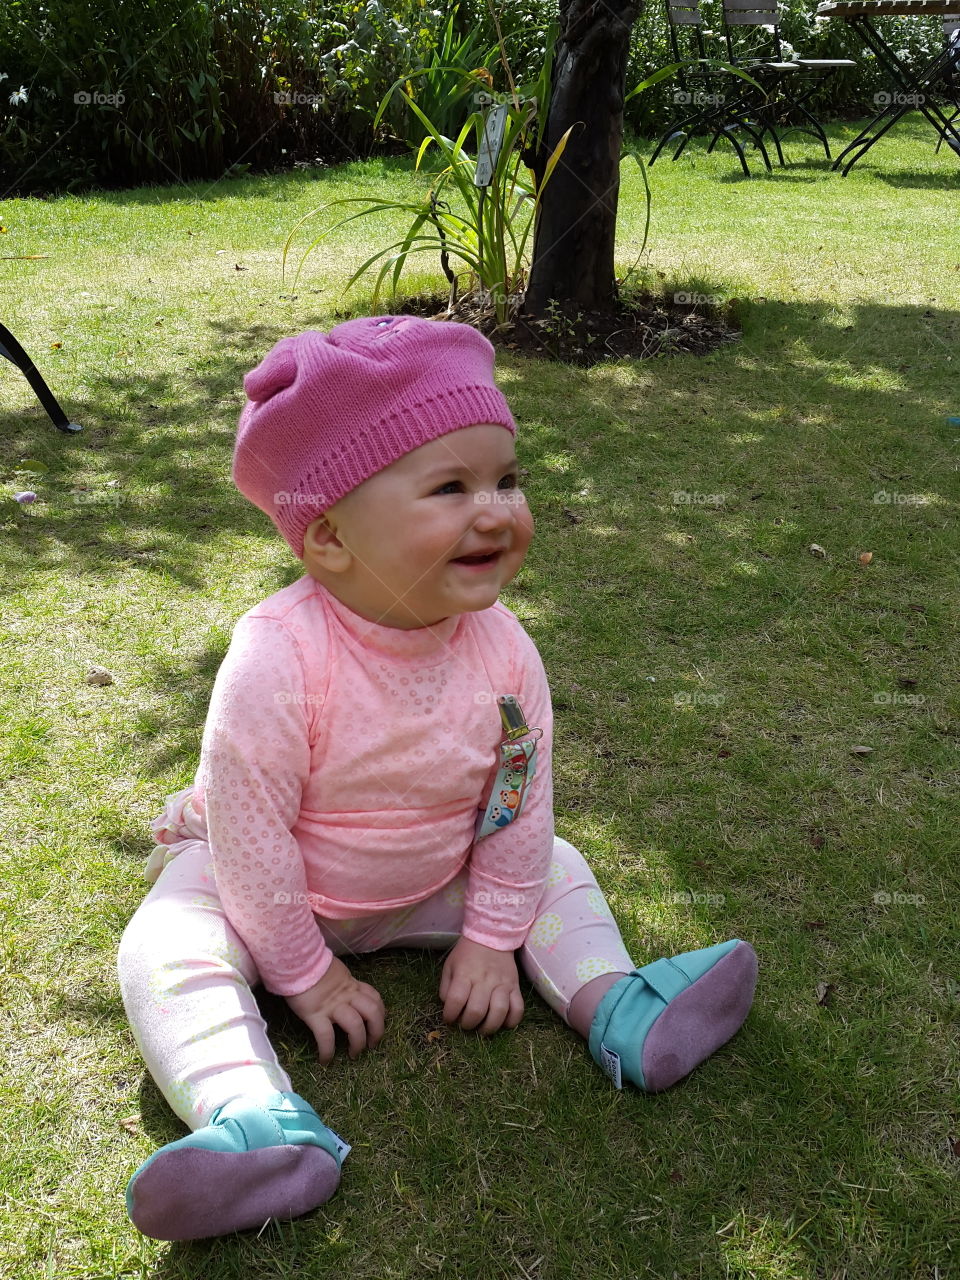 Smiling baby sitting in grass